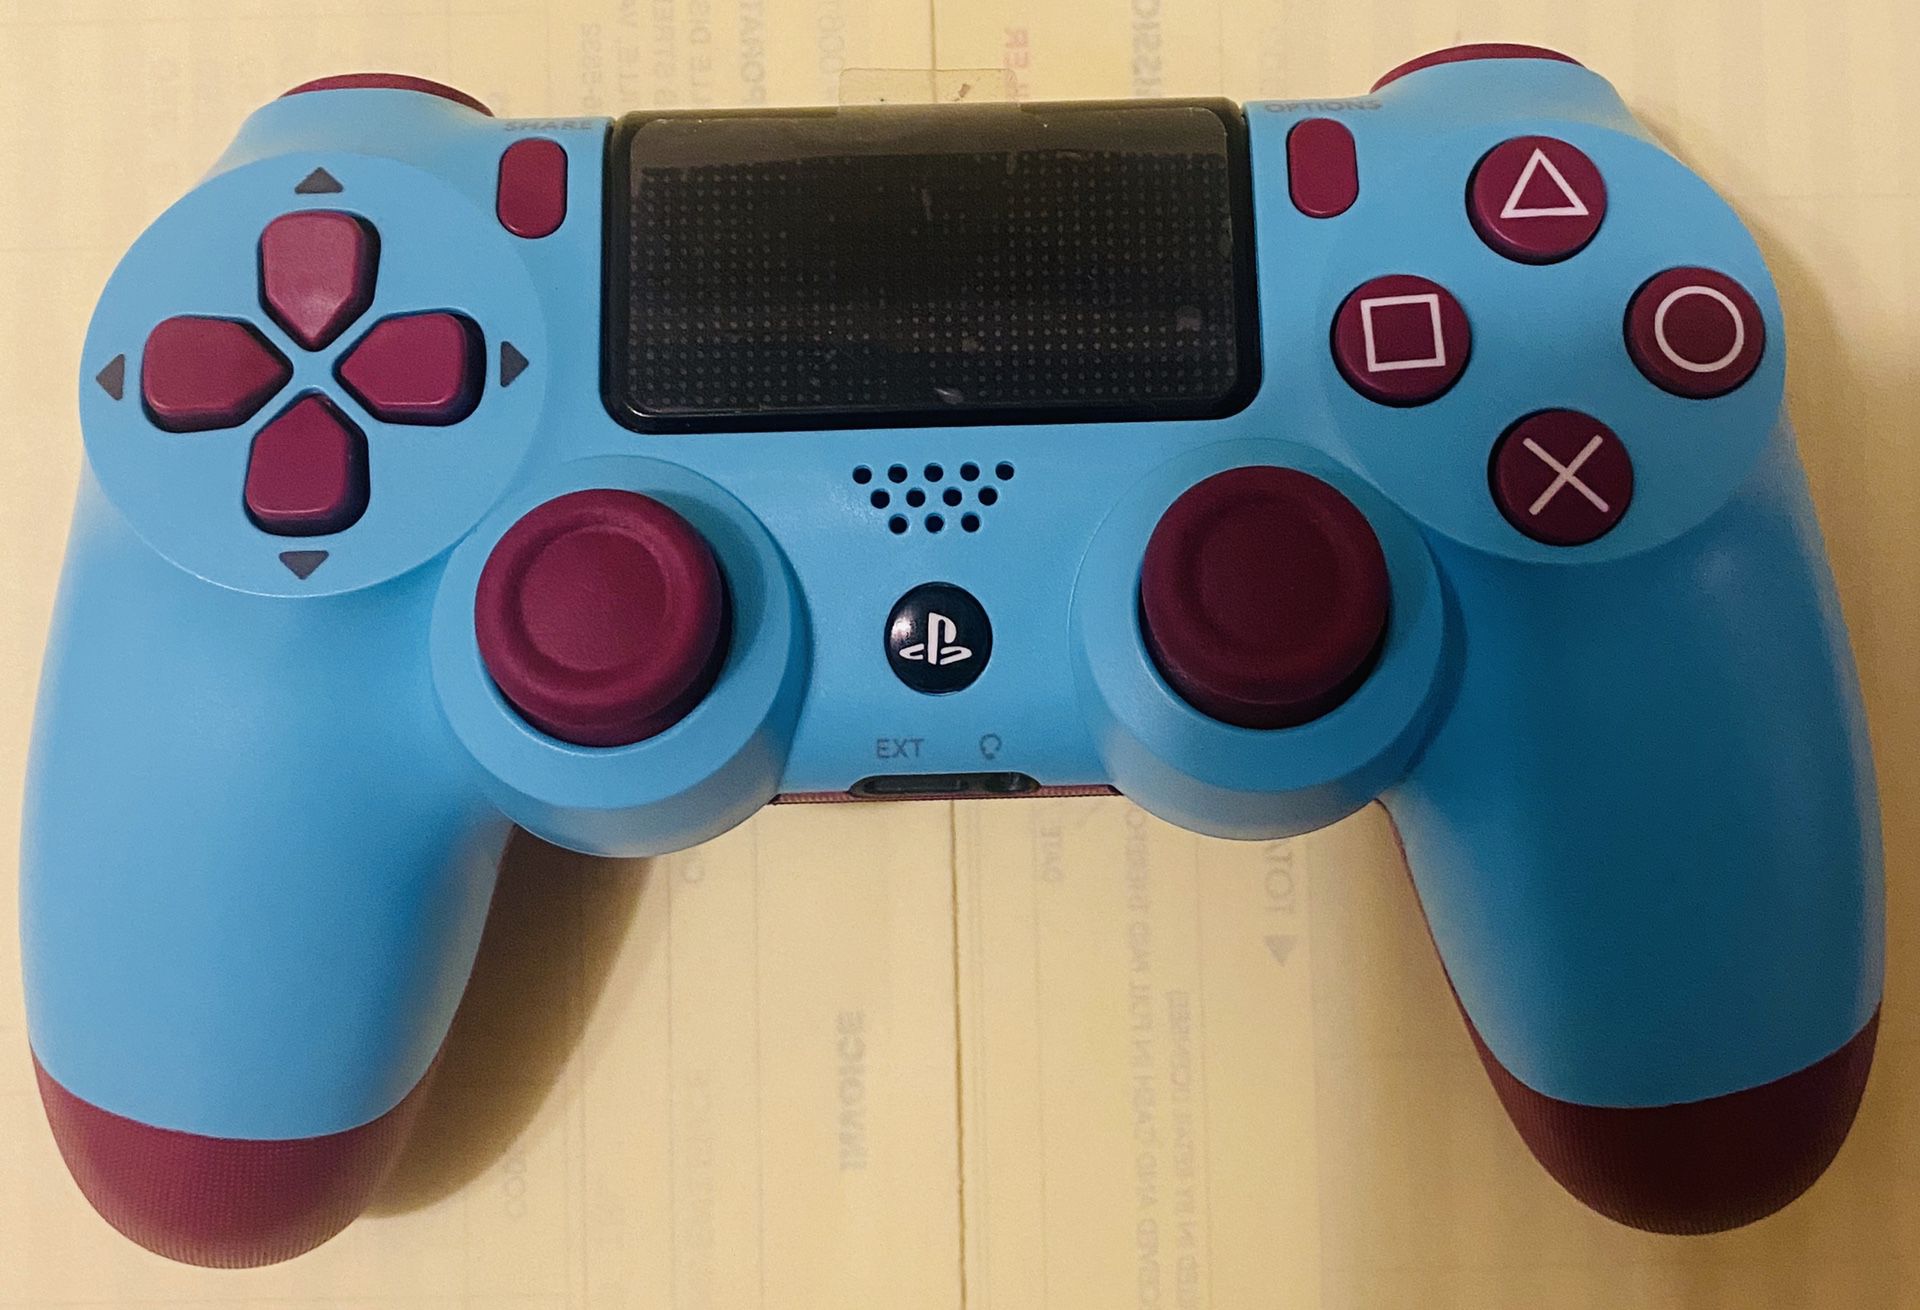 Ps4 wireless controller